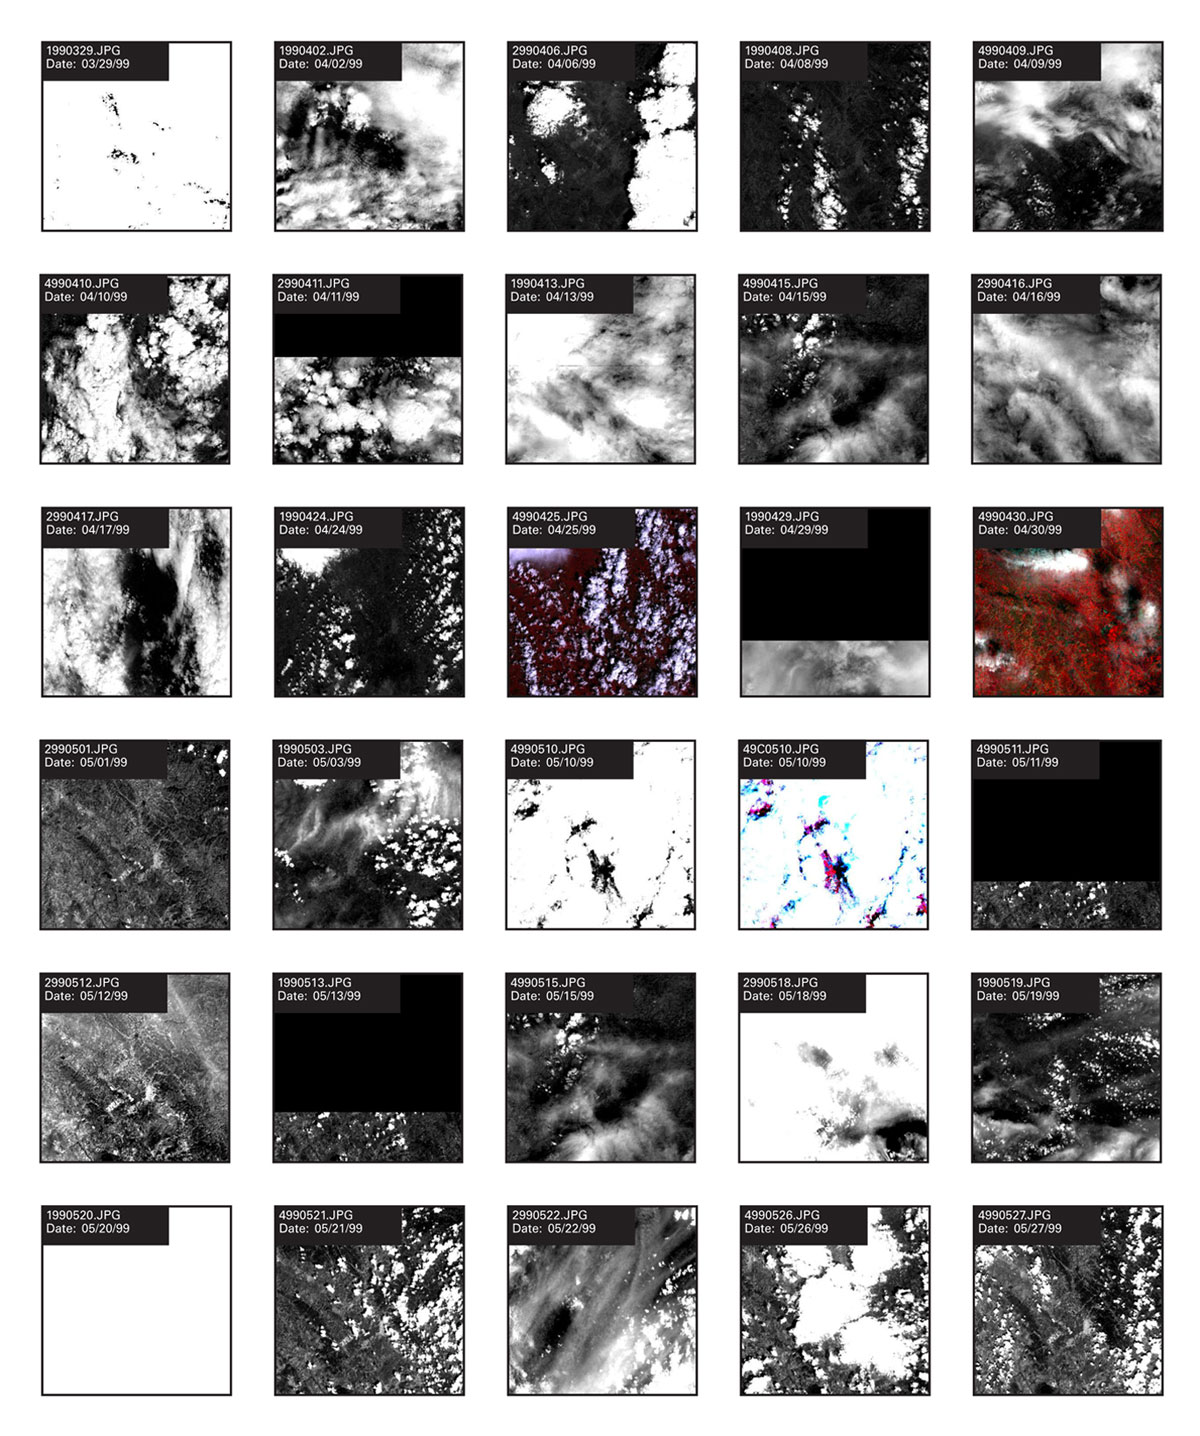 Images recorded by French SPOT satellites over Kosovo on days from late March to late May 1999. 